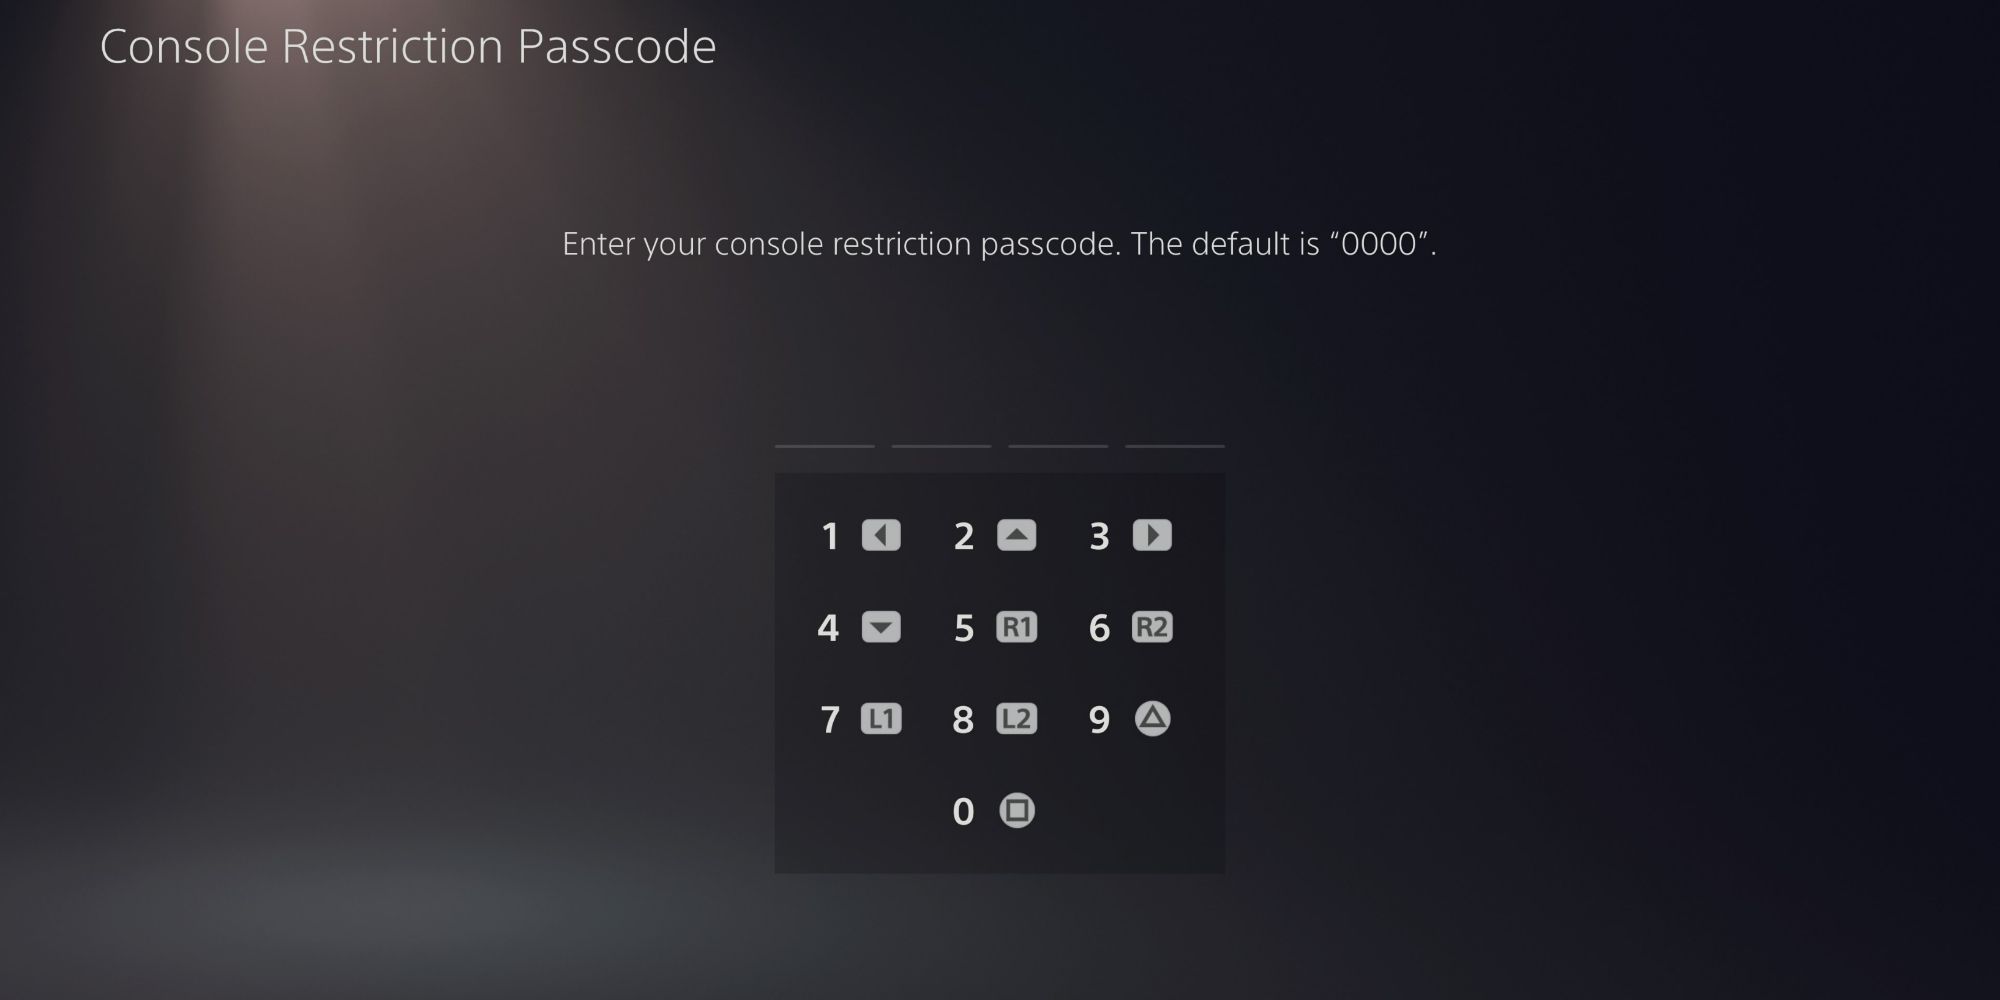 PS5 Guide Console Restriction Passcode